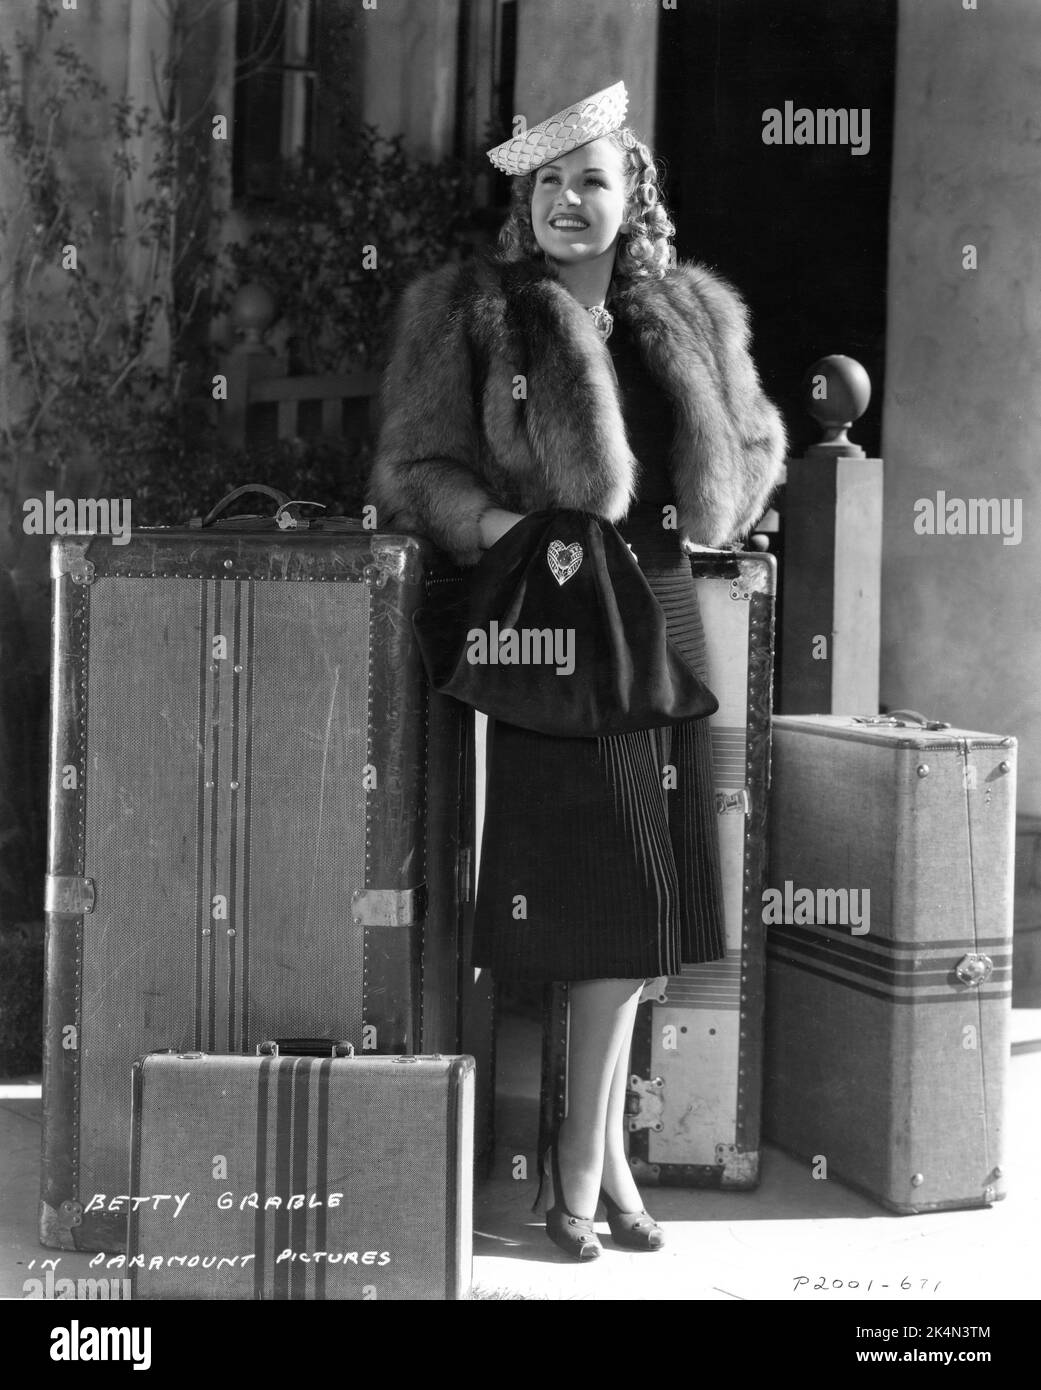 BETTY GRABLE 1939 Fashion Portrait with Luggage publicity for MAN ABOUT TOWN 1939 director MARK SANDRICH Paramount Pictures Stock Photo